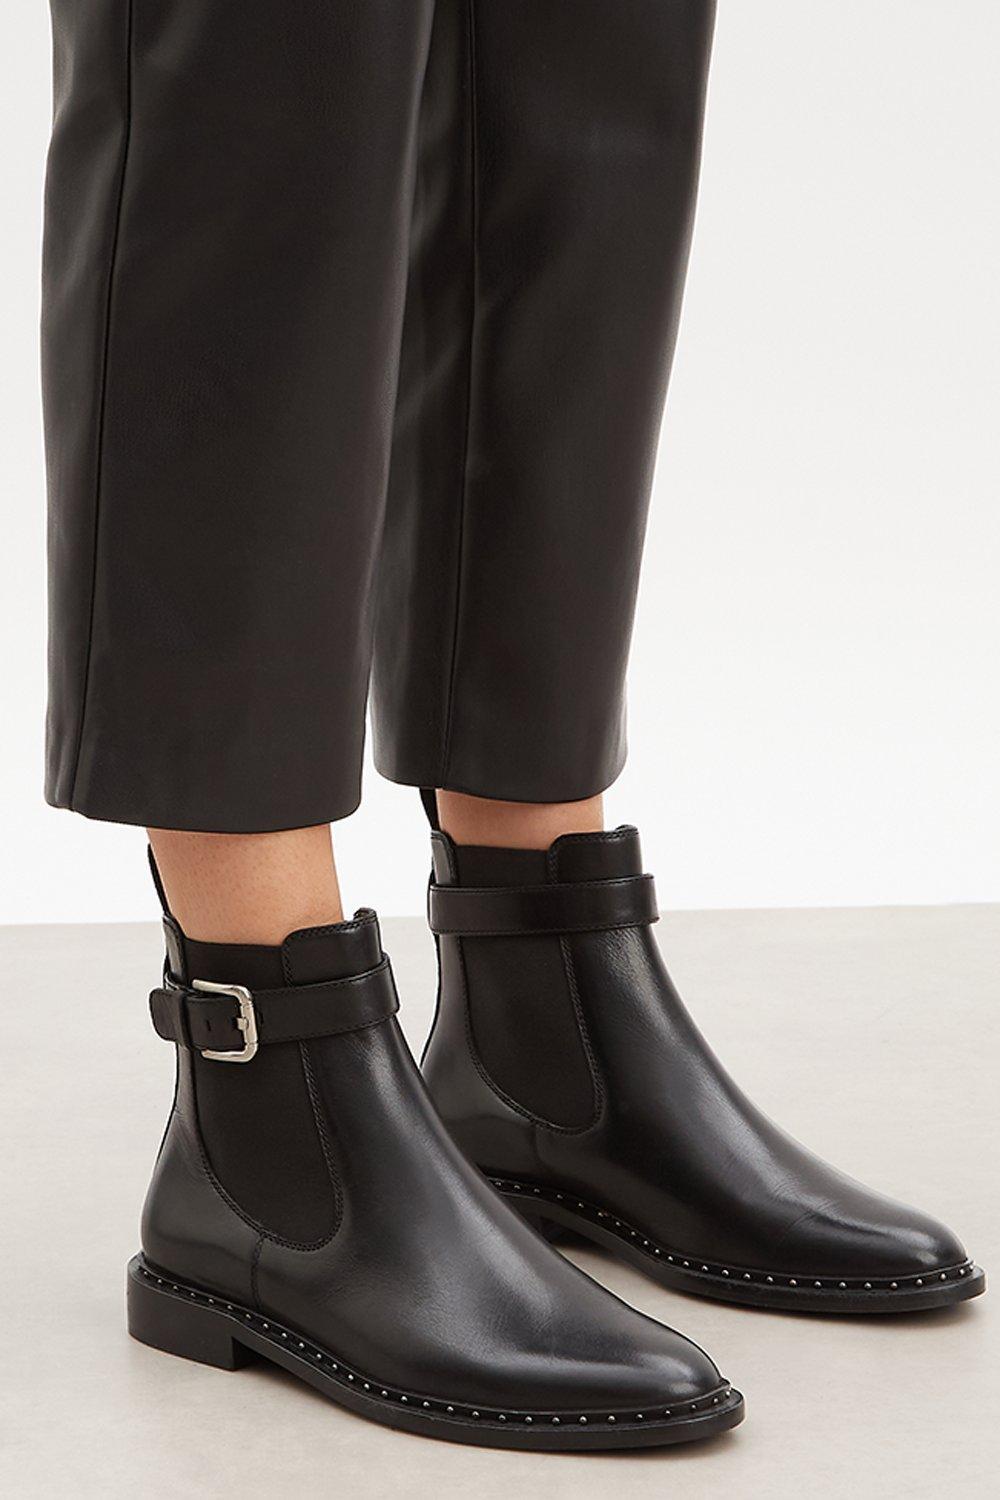 Boots | Principles: Maggie Leather Buckle Detail Chelsea Boots | Principles